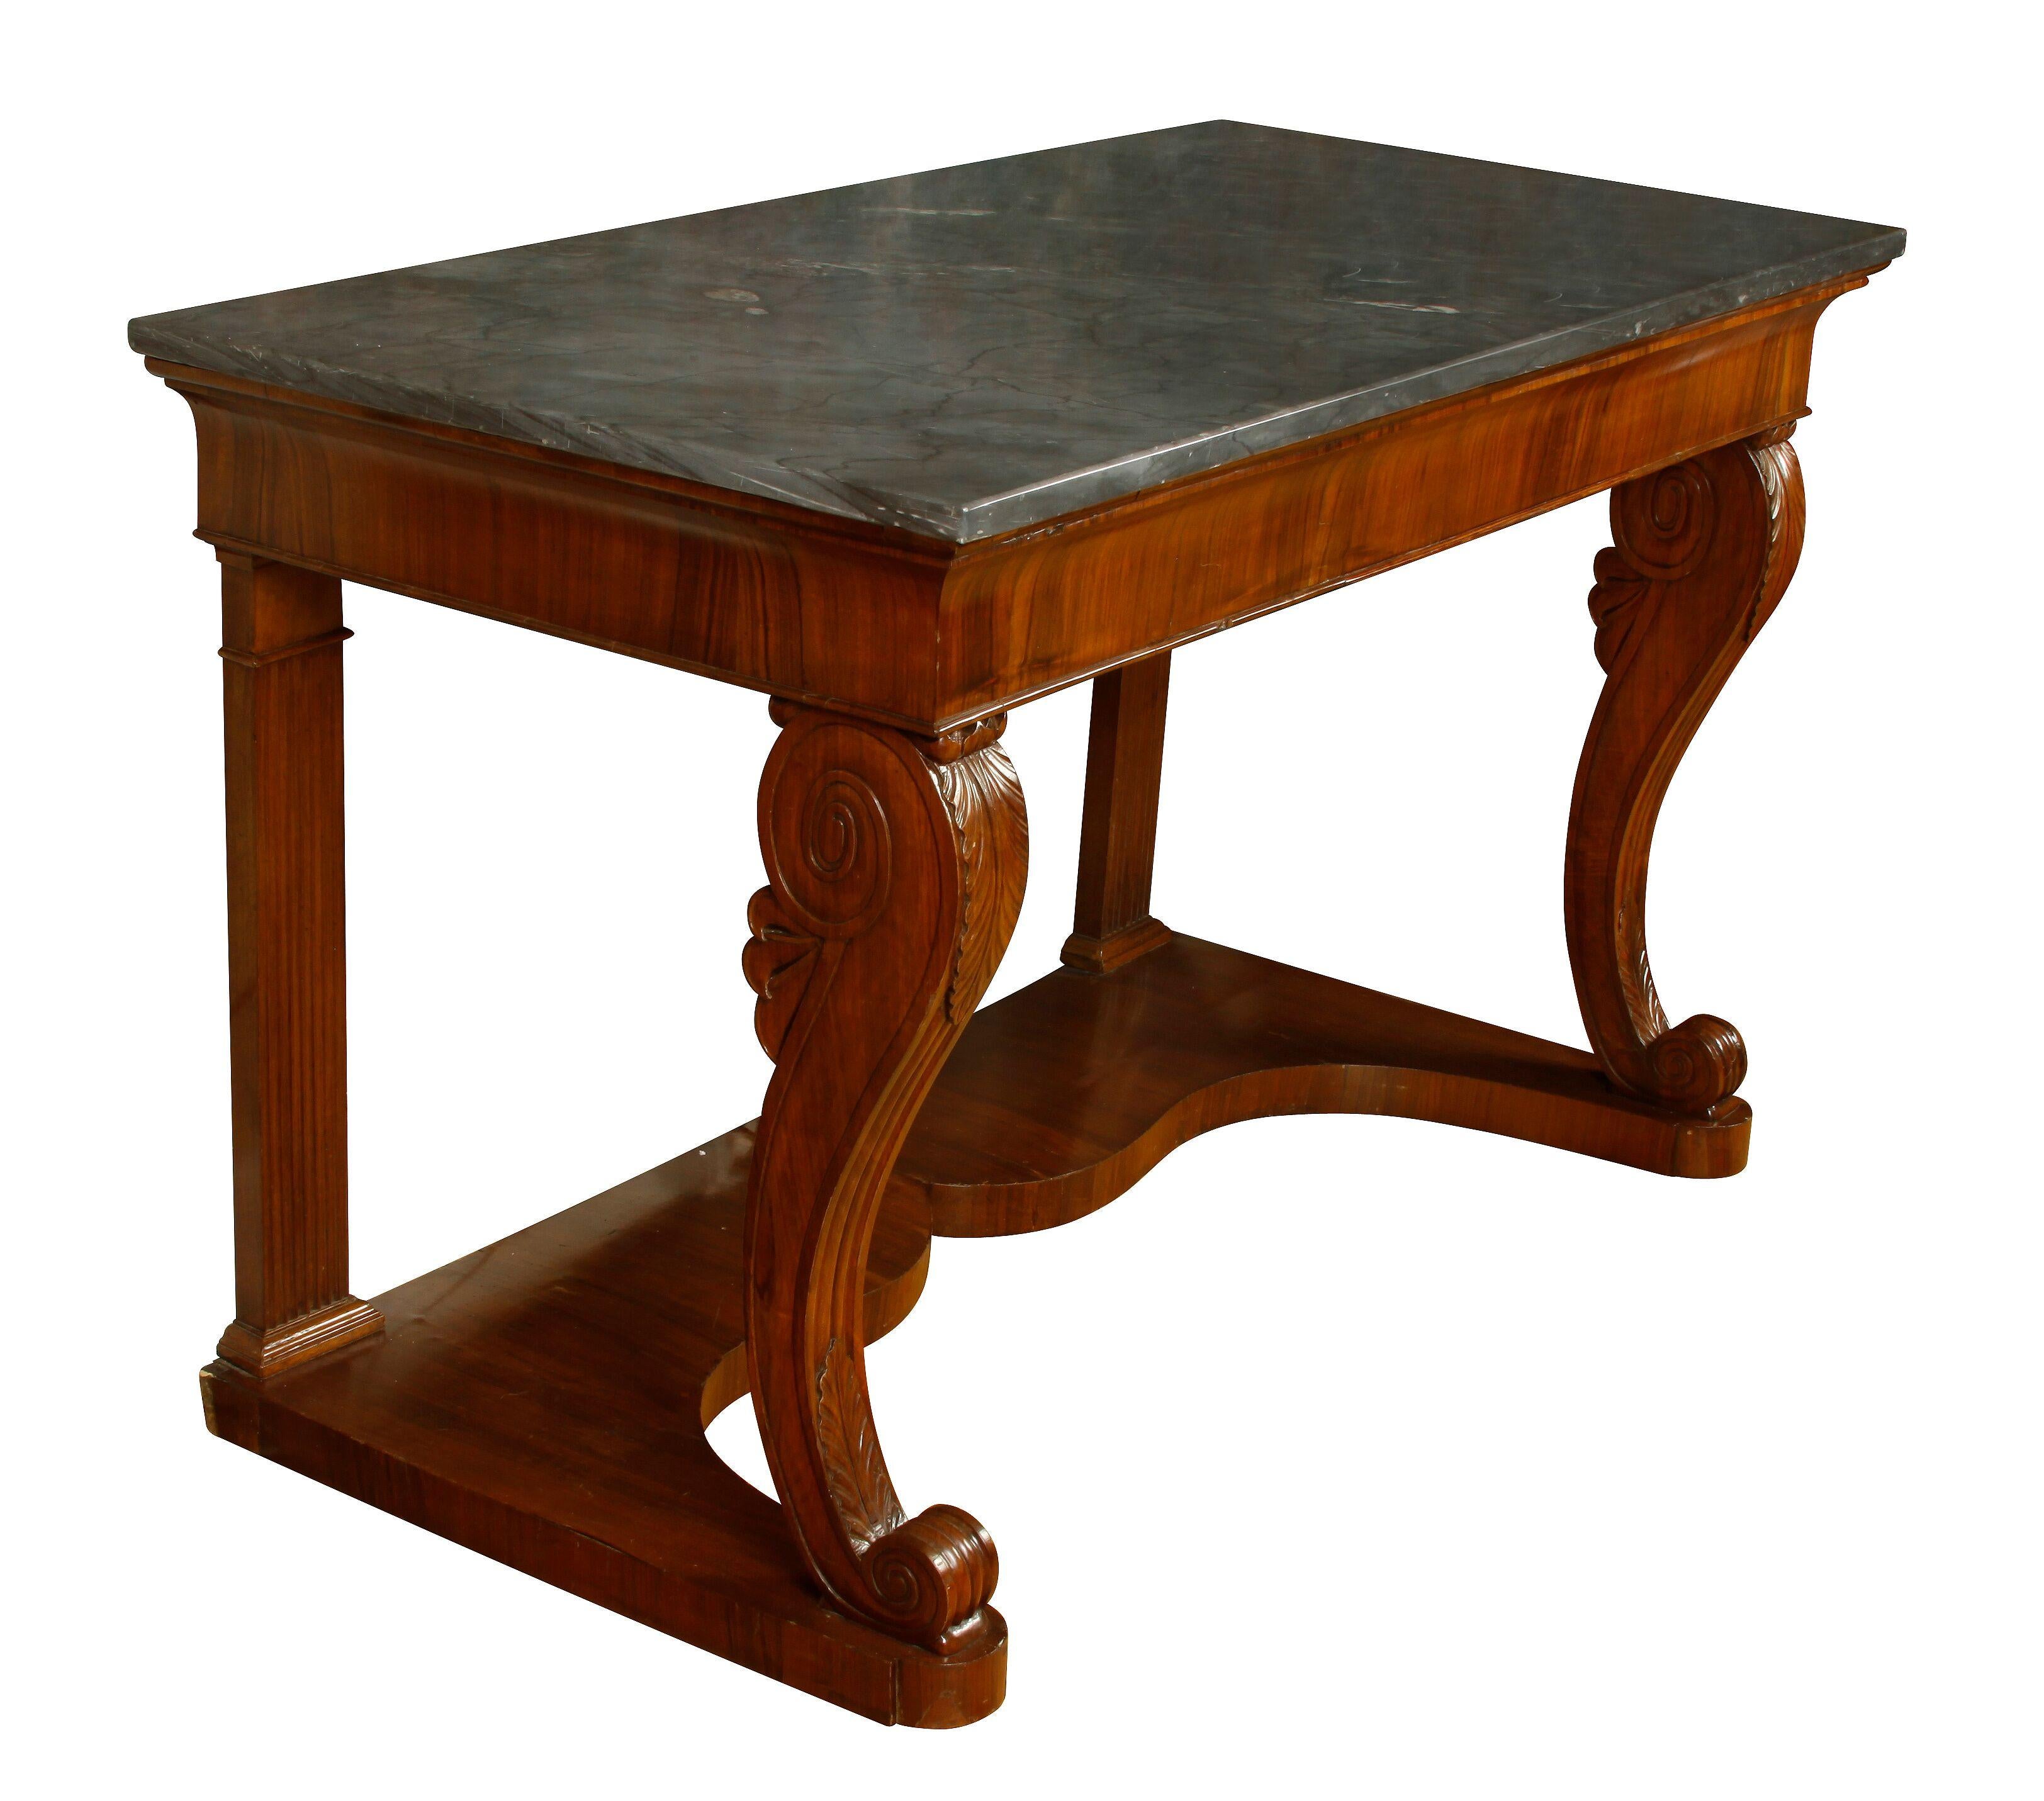 Walnut and gray marble Empire console, circa 1880. Carved legs with leaf curved design on front legs and reeded legs in back.